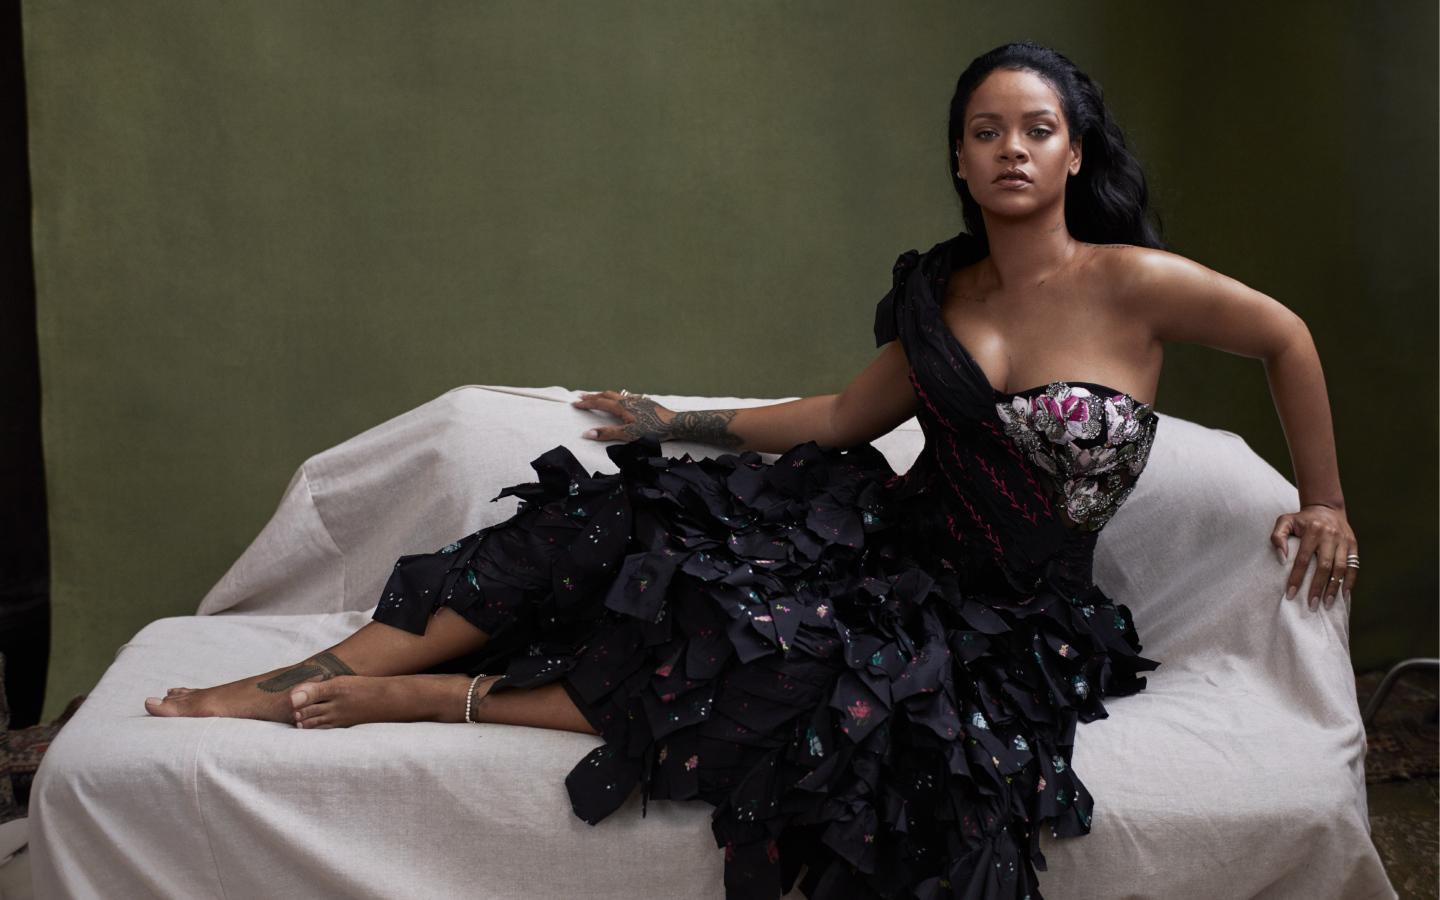 Singer Rihanna in a black dress on the couch